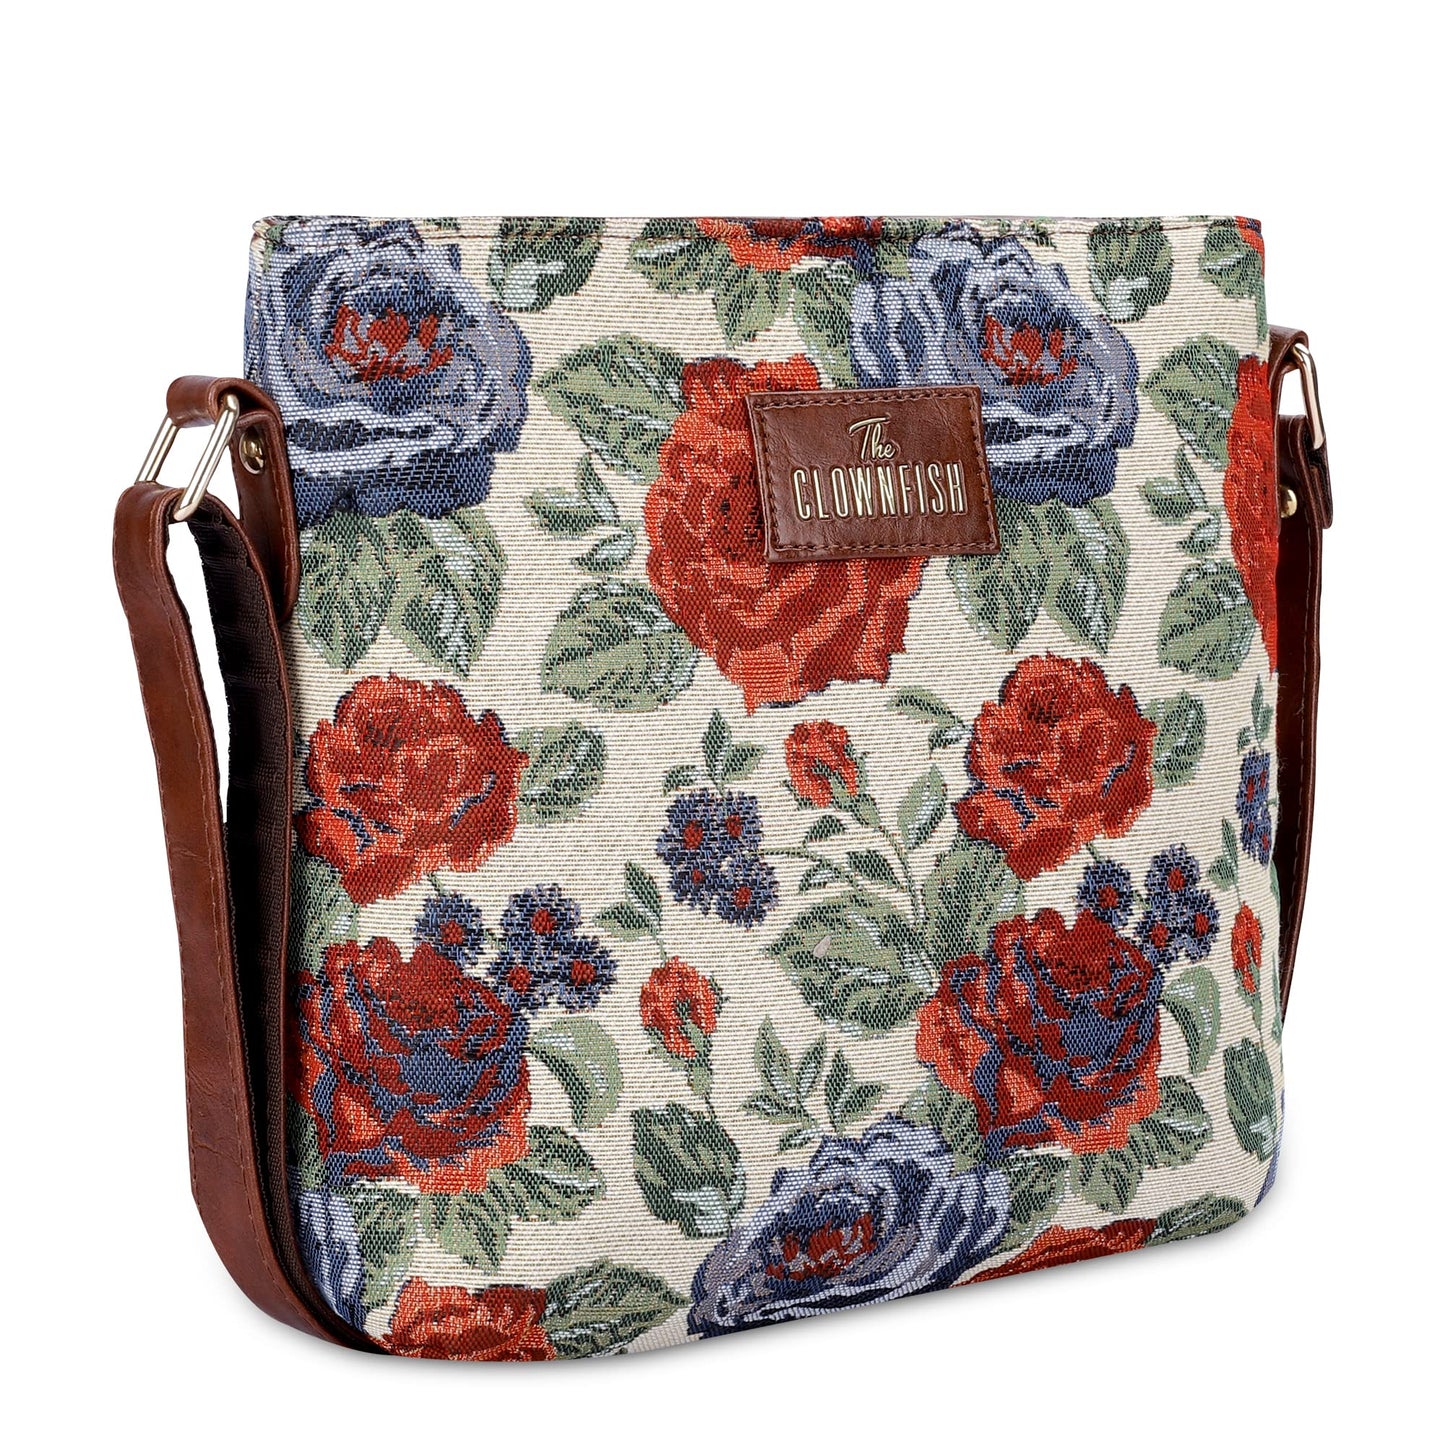 THE CLOWNFISH Linda Series Sling for Women Casual Ladies Single Shoulder Bag For Women Crossbody Bag for College Girls (Red-Floral)